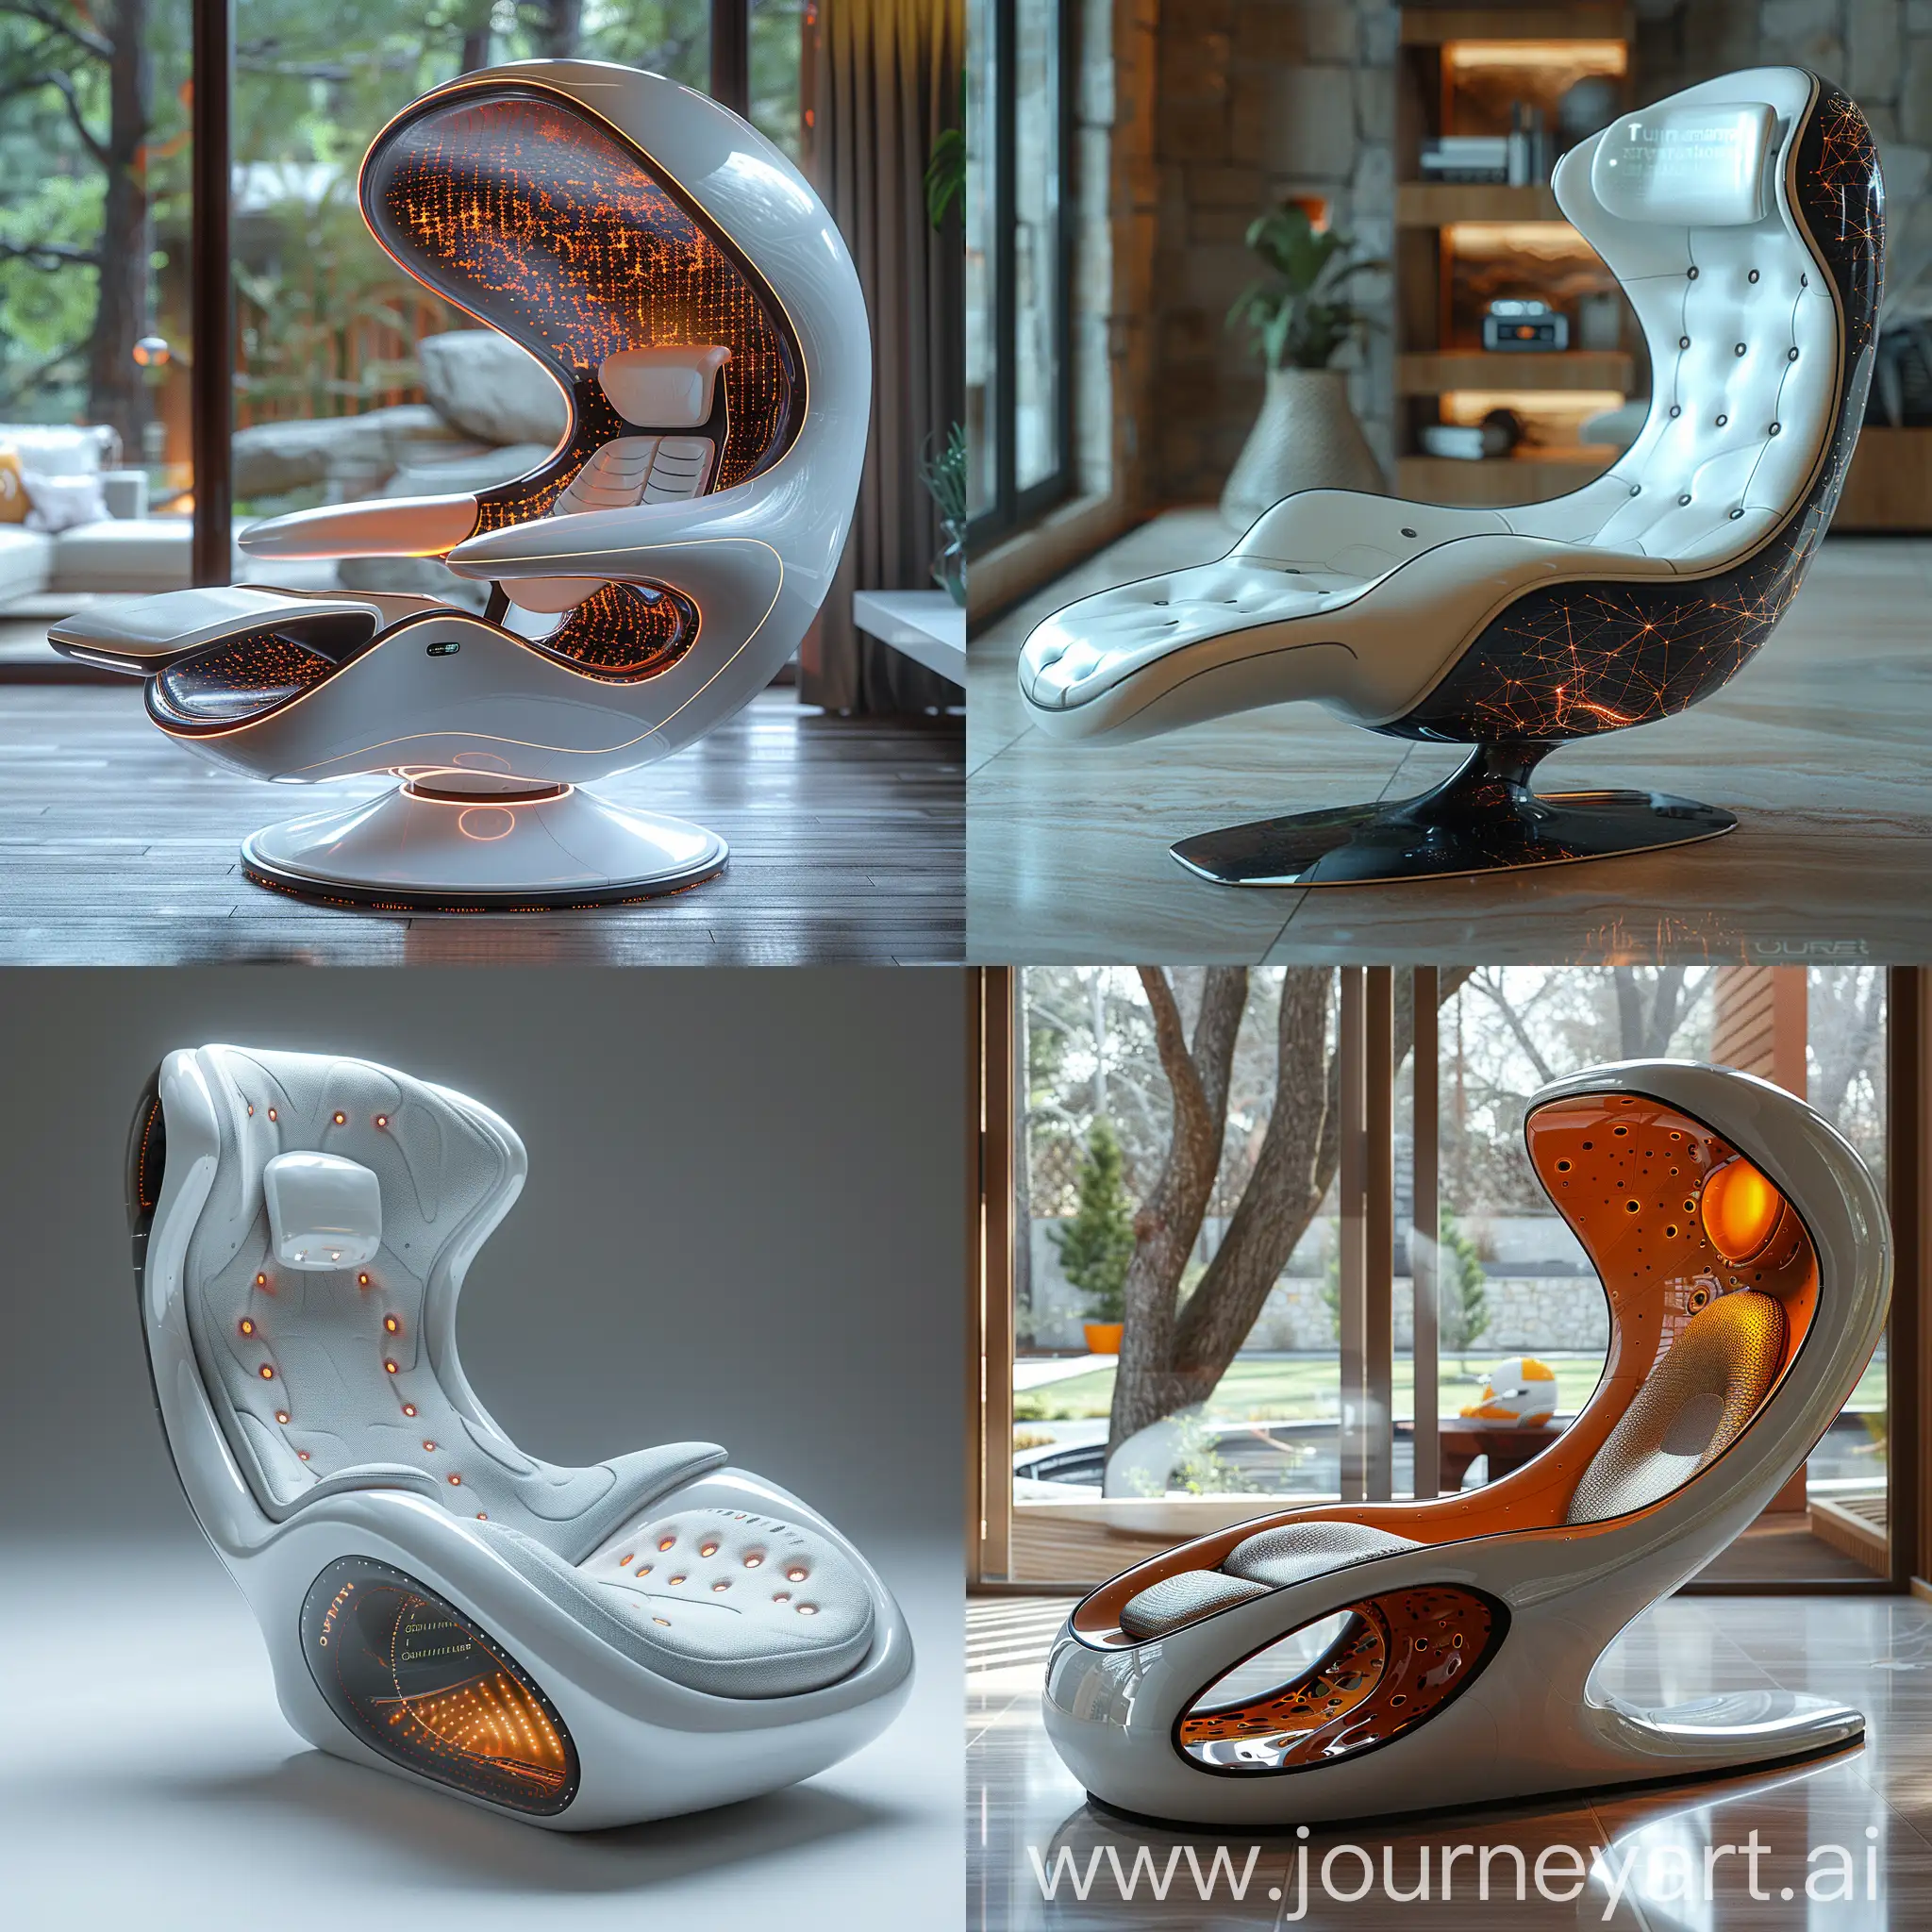 Futuristi chair, biometric recognition and abjustment, environmental integration, self-repairing nanofibers, kinetic energy harvesting, interactive holographic display, universal design, sustainable materials, mind-machine interface integration, virtual reality integration, octane render --stylize 1000